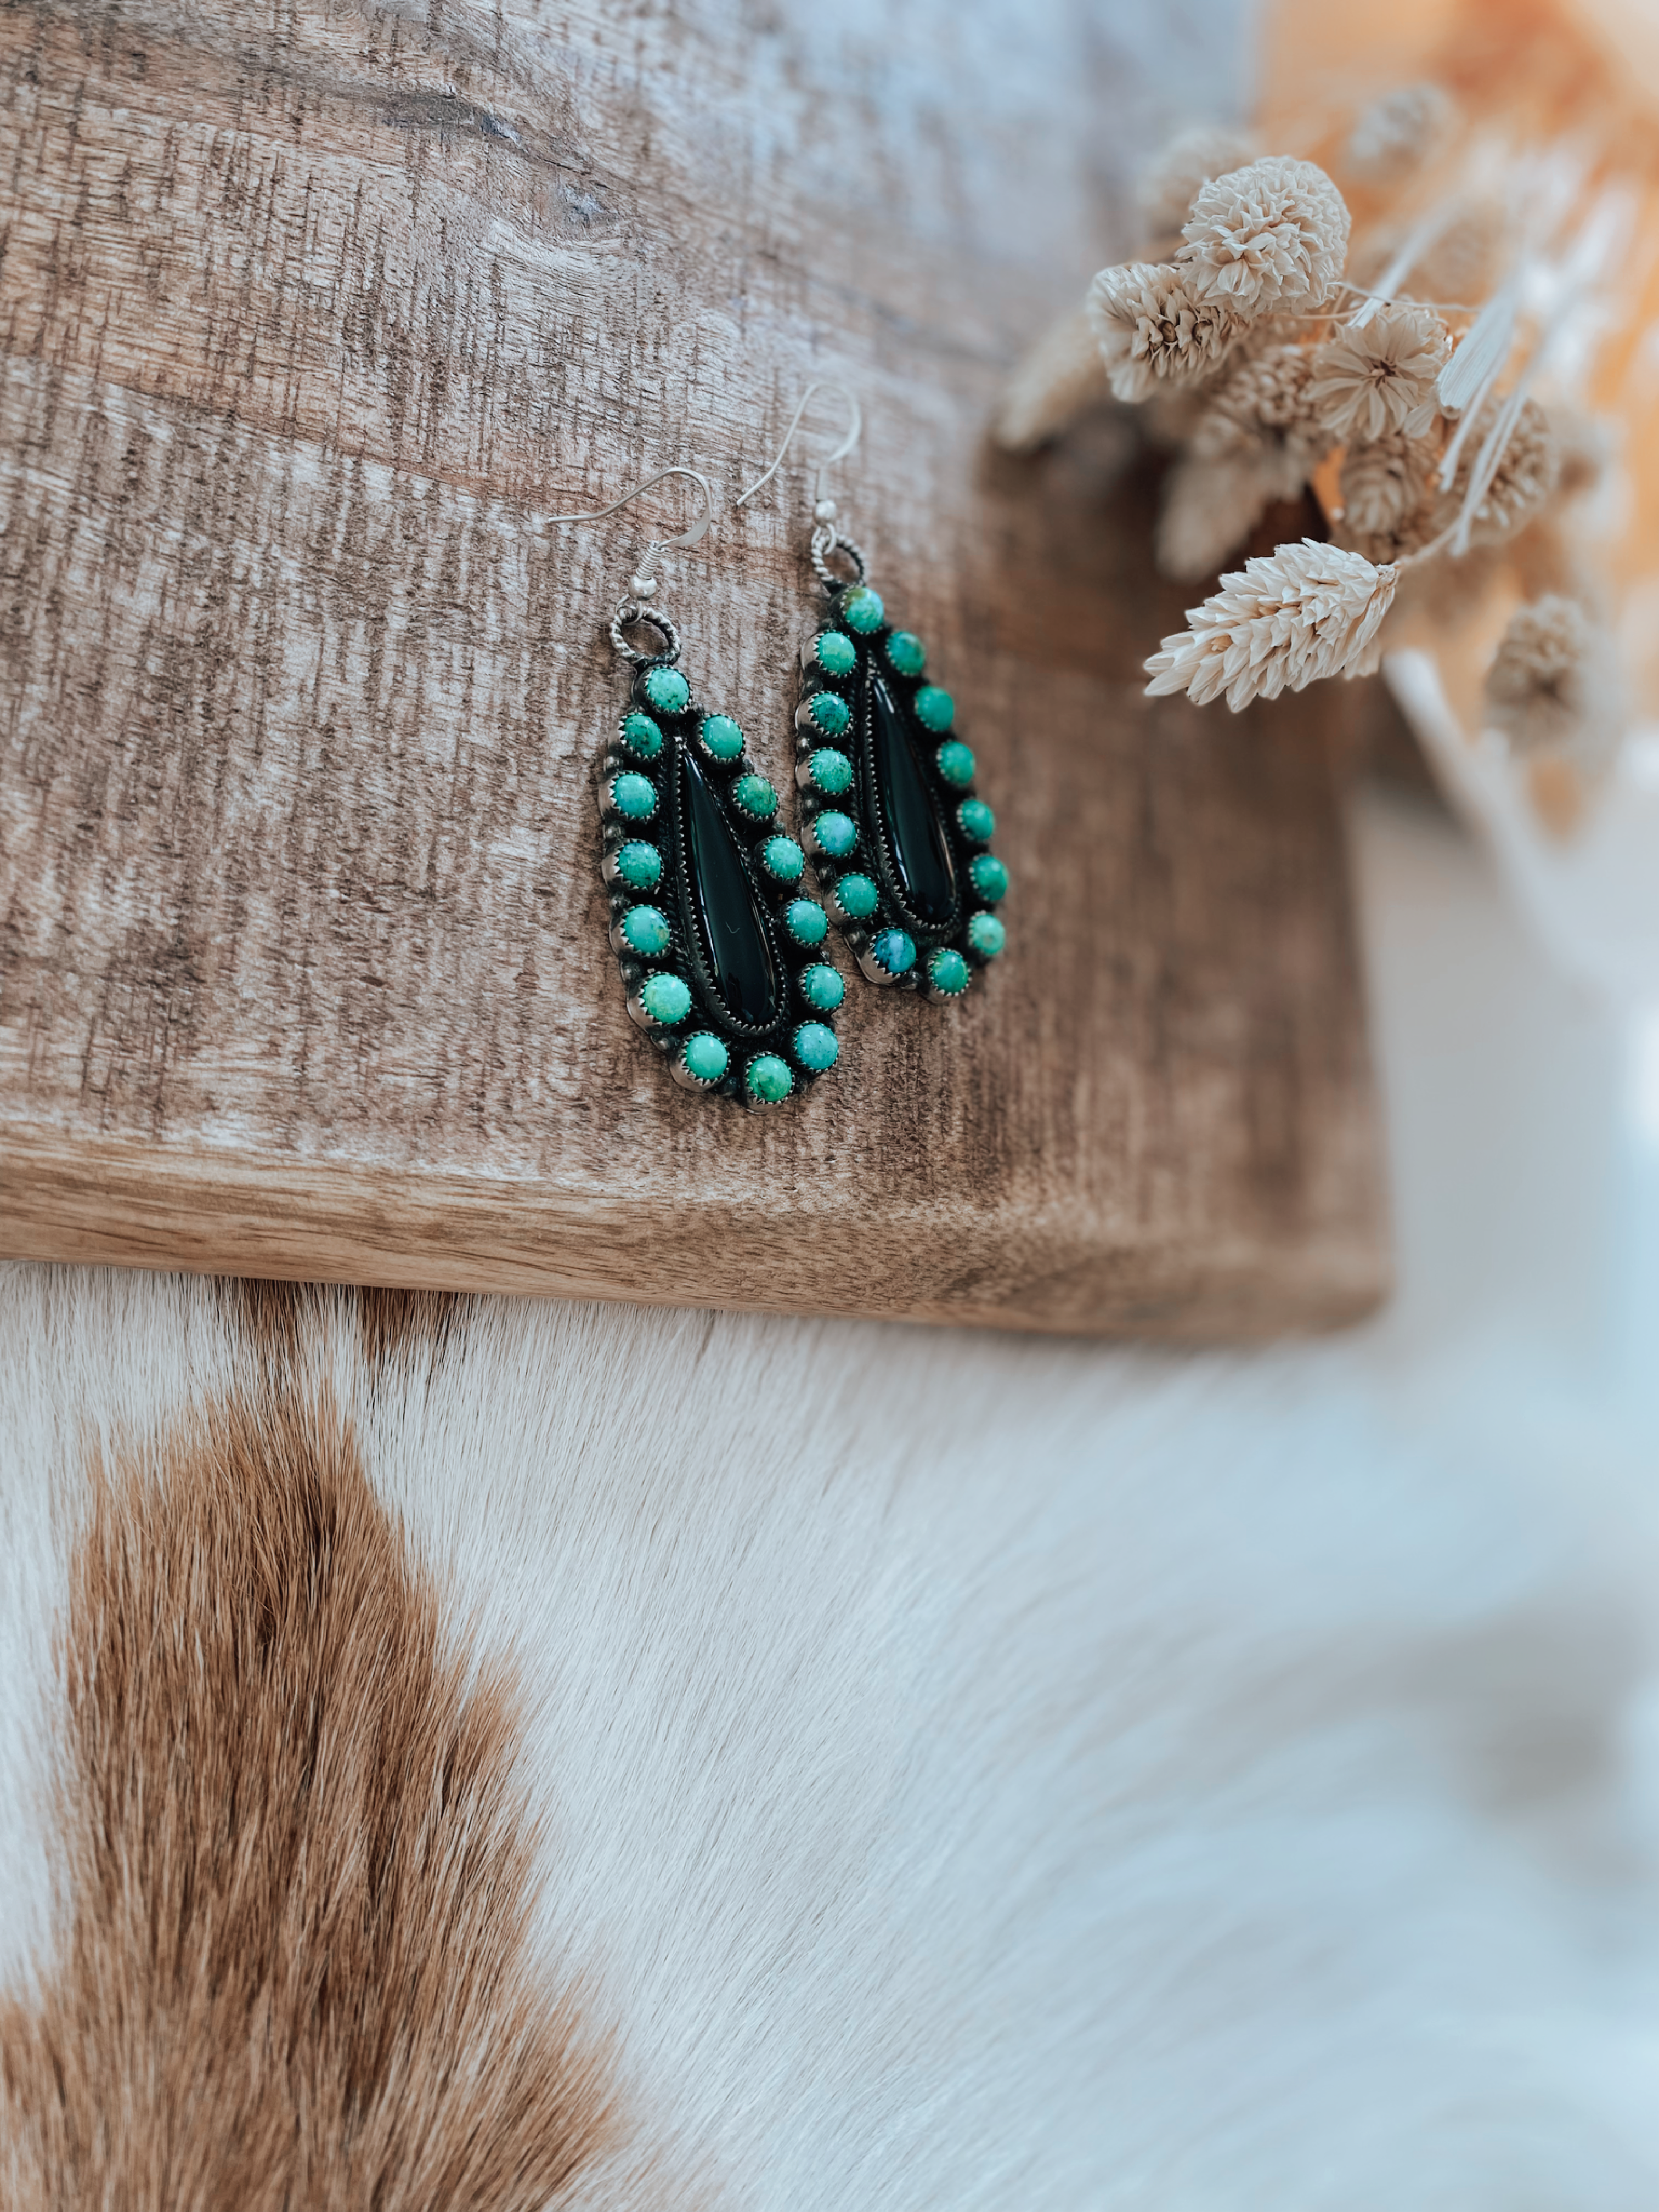 Black Onyx and Turquoise Earrings